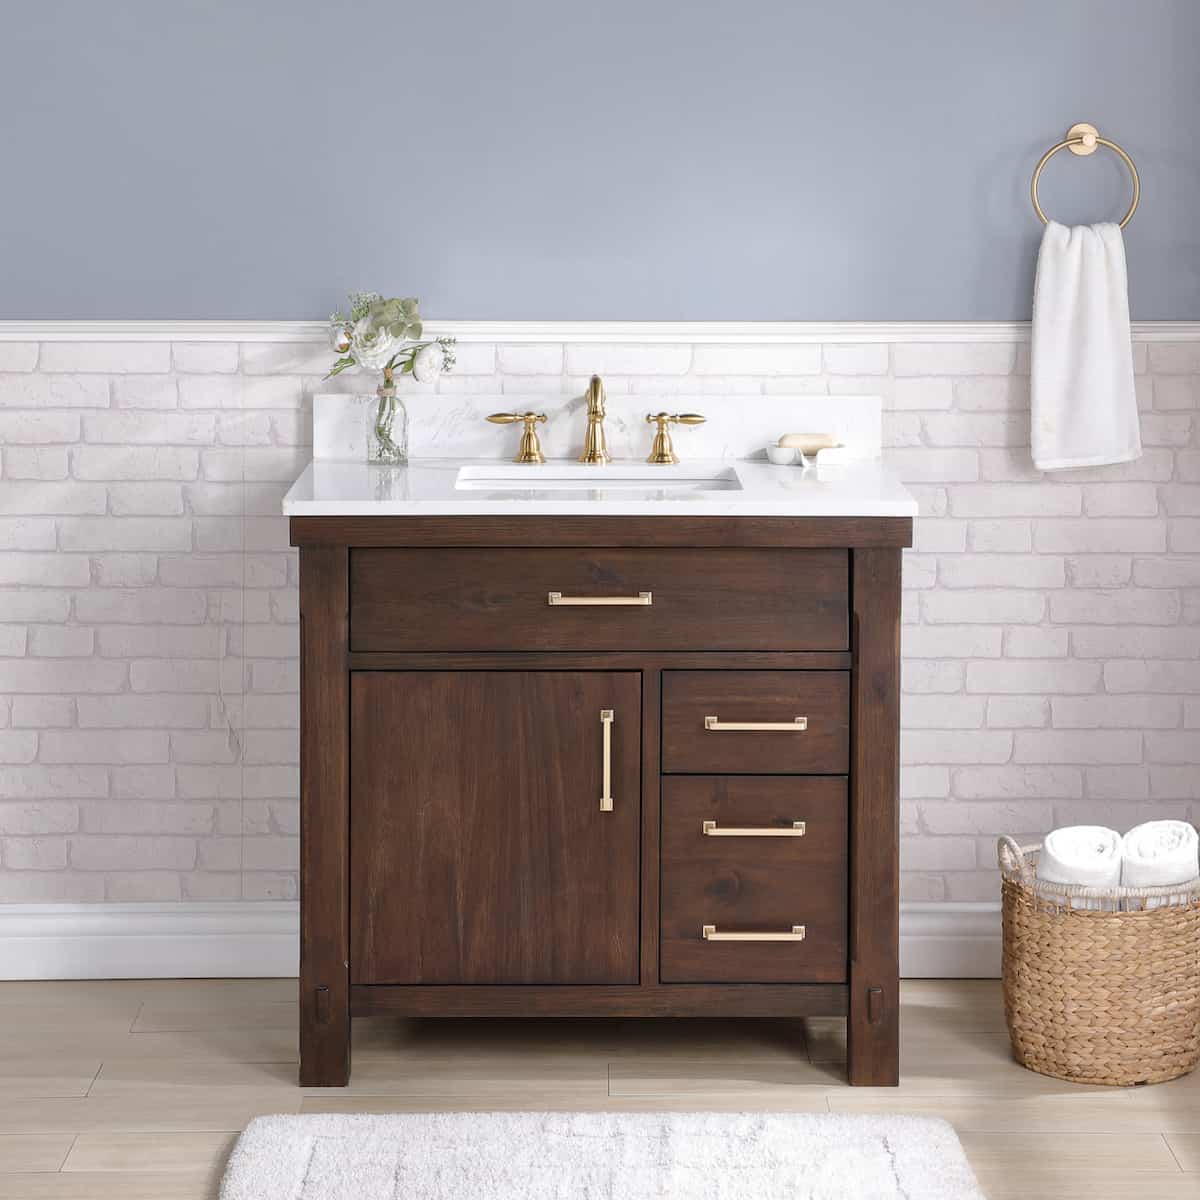 Vinnova Viella 36 Inch Freestanding Single Sink Bath Vanity in Deep Walnut Finish with White Composite Countertop Without Mirror in Bathroom 701836-DW-WS-NM